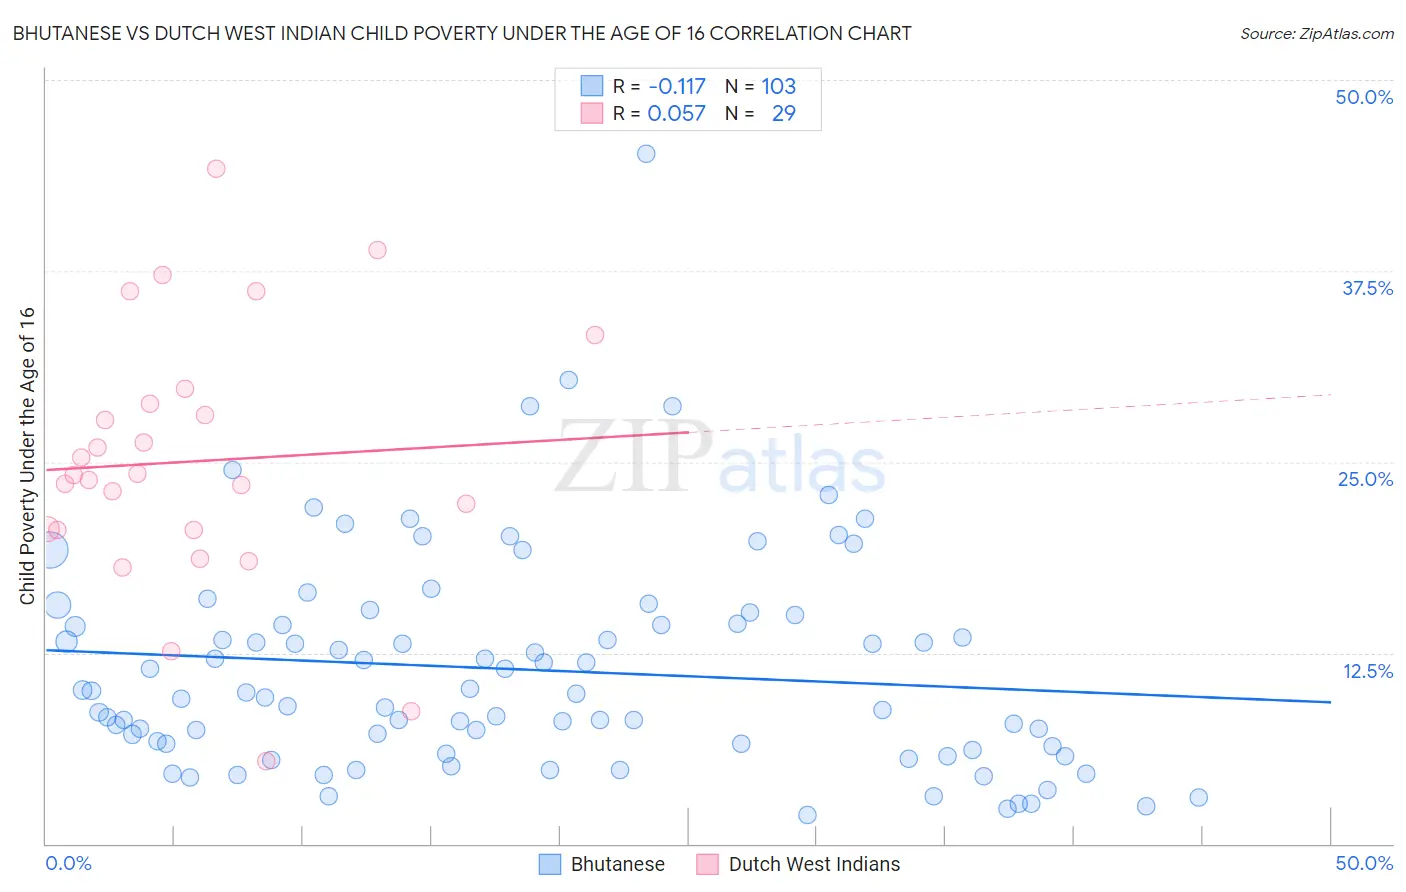 Bhutanese vs Dutch West Indian Child Poverty Under the Age of 16